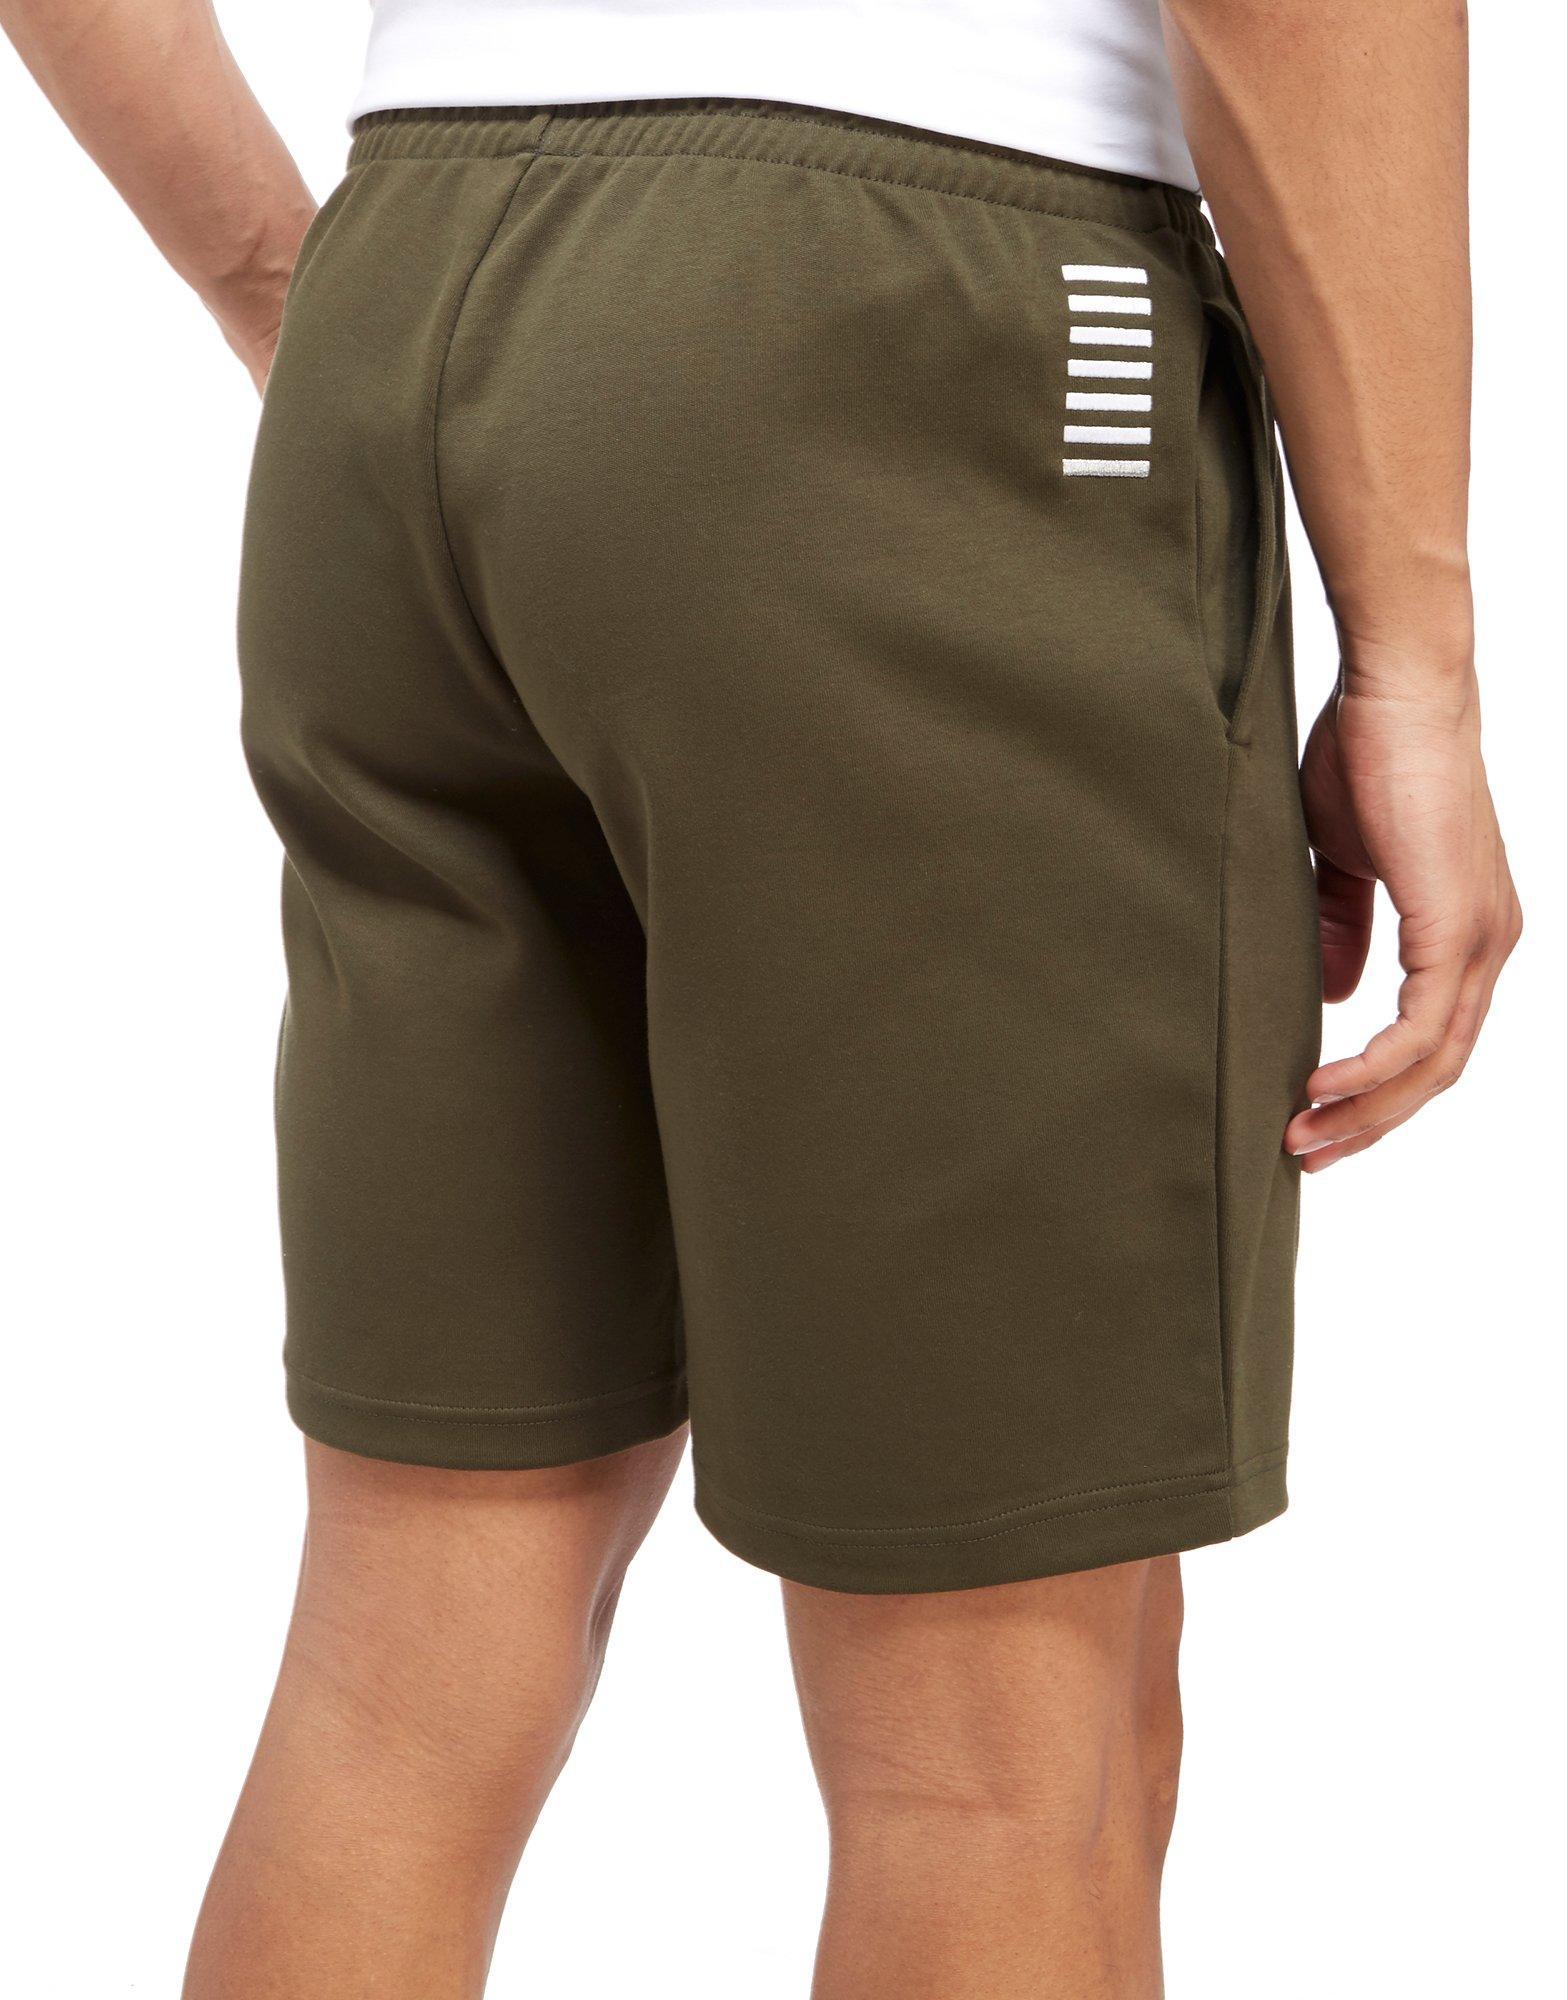 EA7 Cotton Shadow Line Shorts in Olive (Green) for Men - Lyst